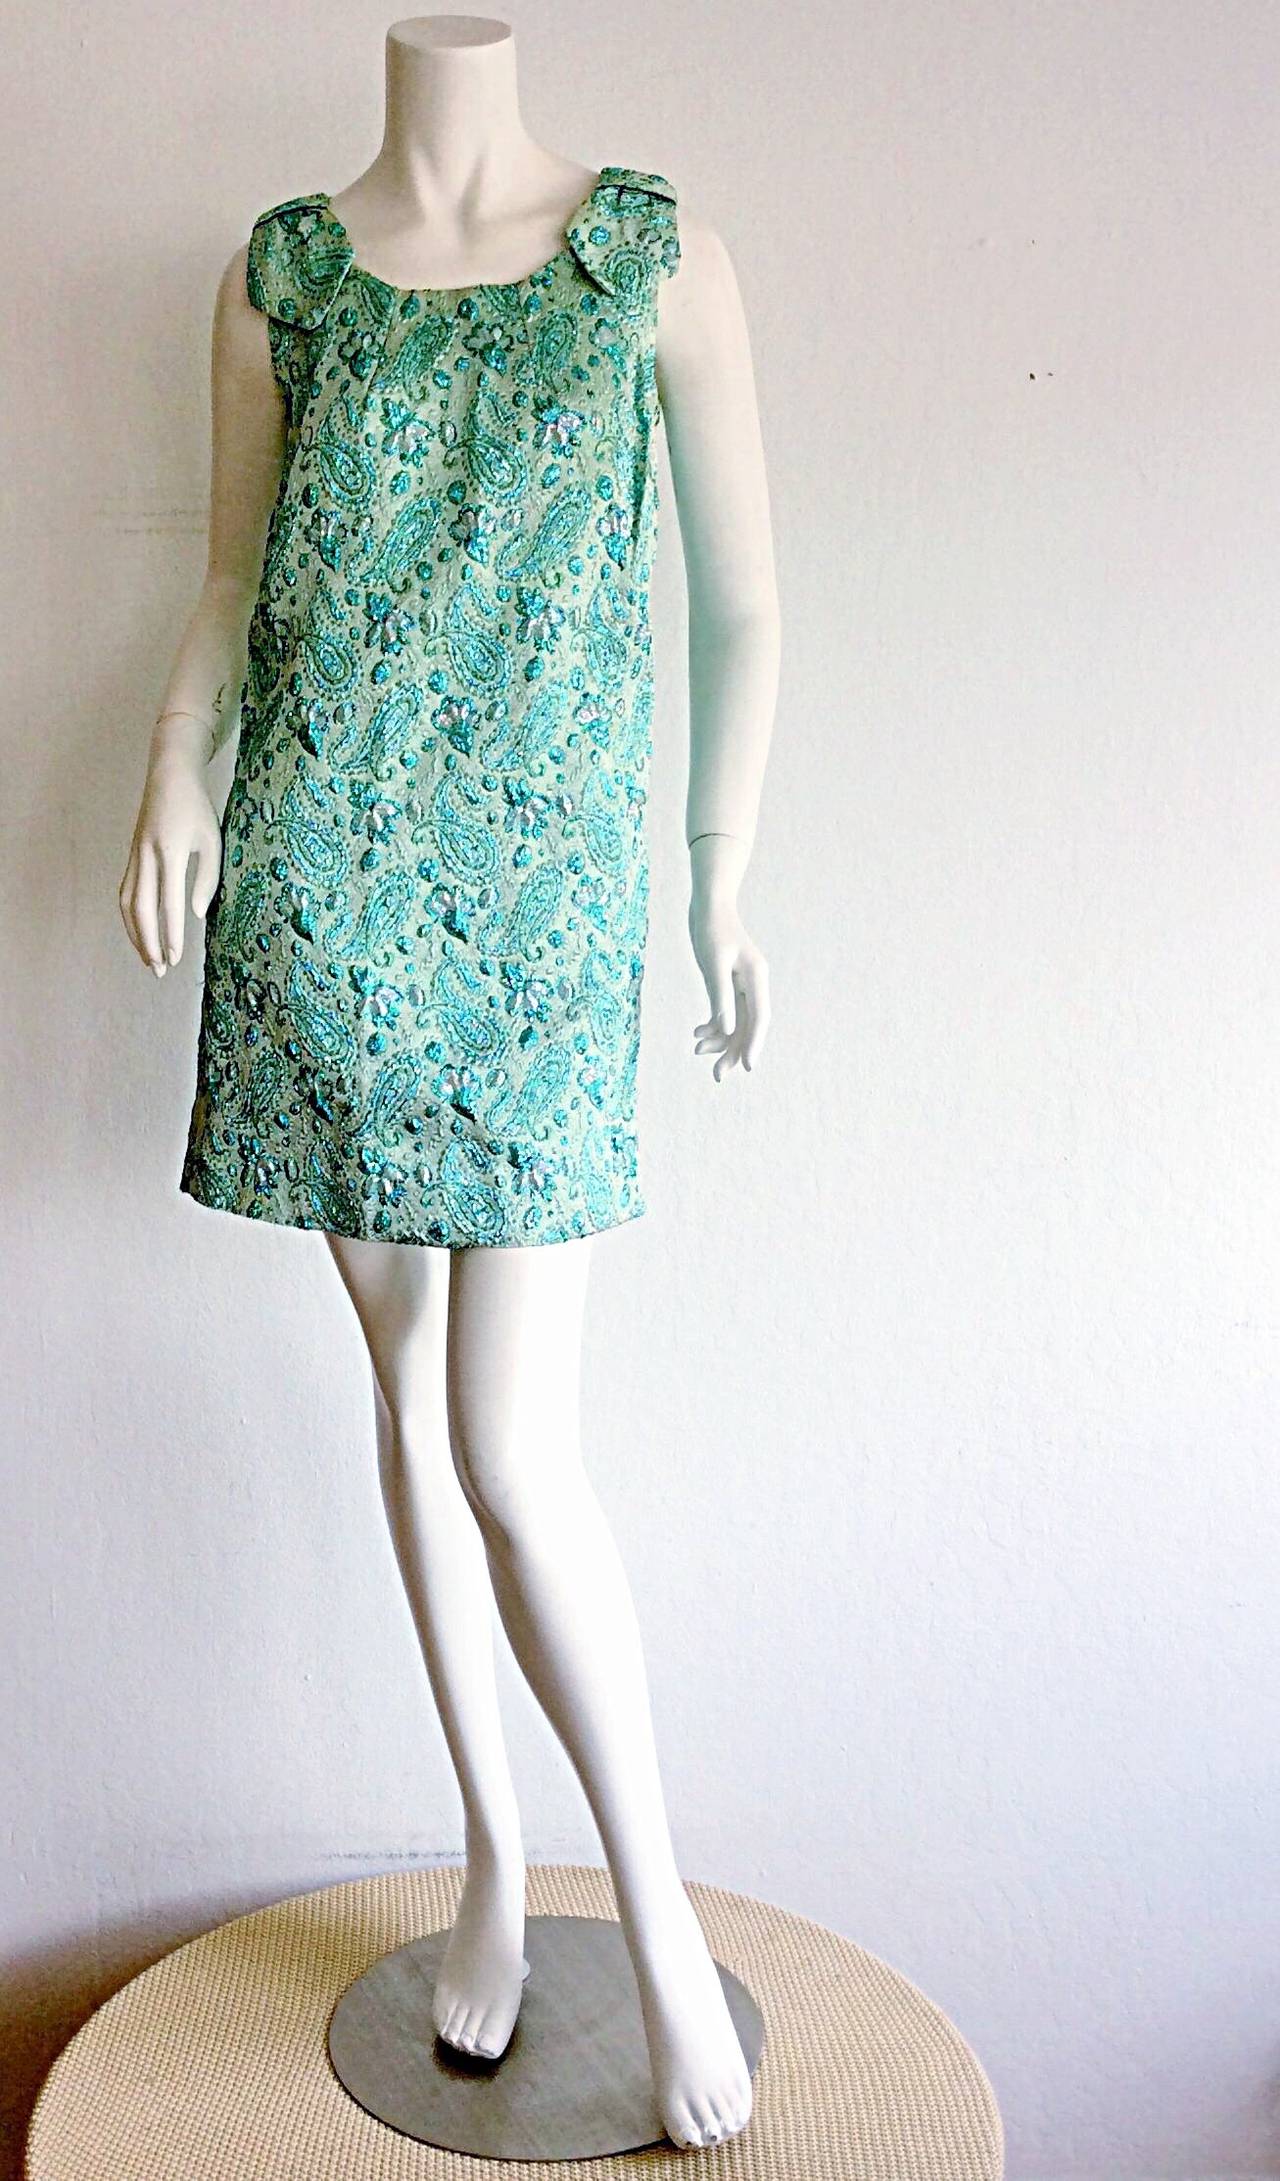 The cutest vintage 1960s metallic brocade paisley dress! Beautiful hues of blue, with metallic silk thread throughout. Wonderful petal sleeves. A truly flattering Babydoll fit. In great condition. Approximately Size XS-Small

Measurements:
32-34